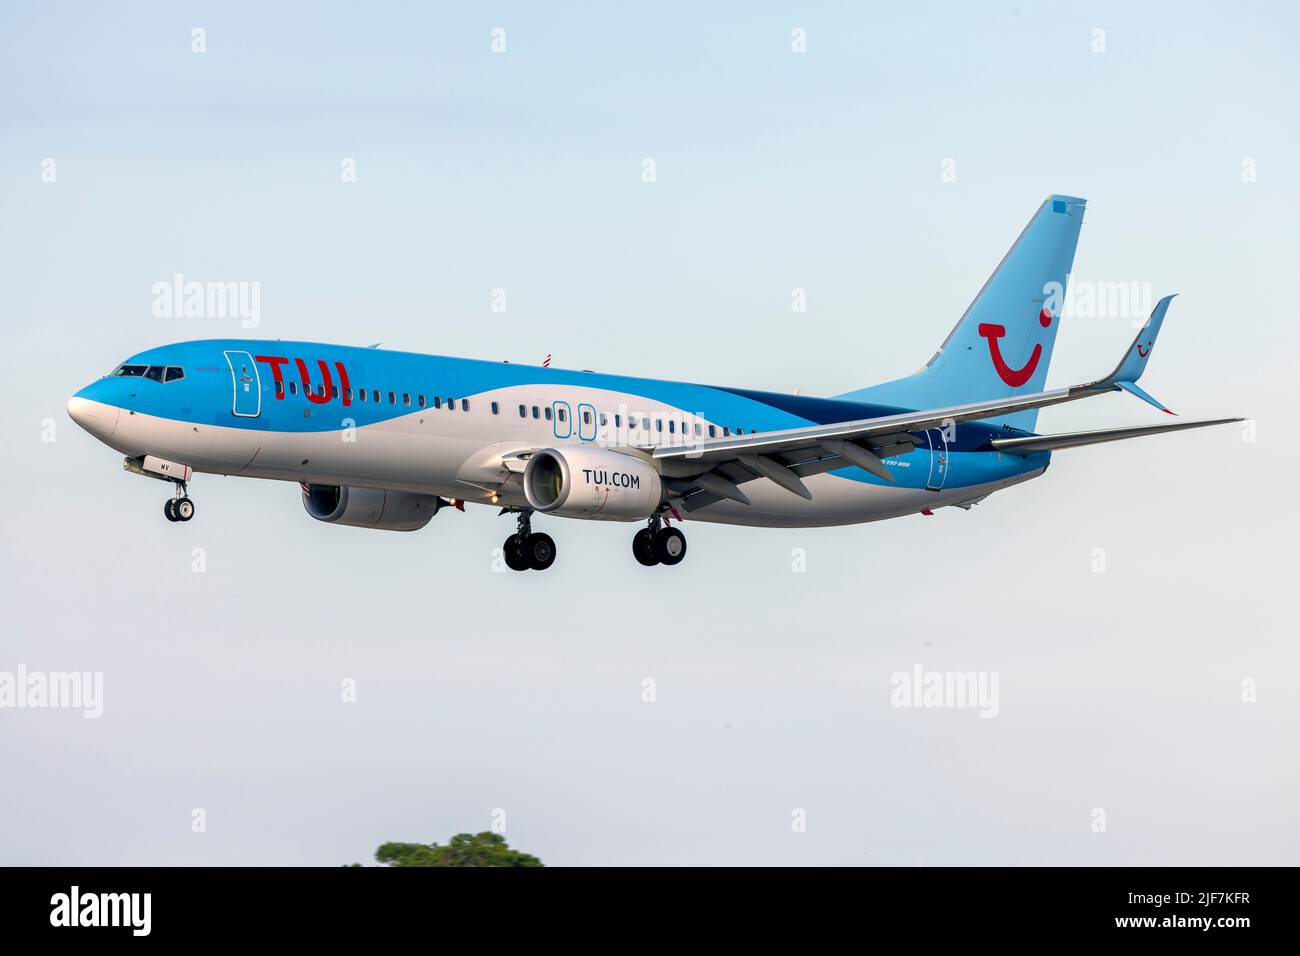 Sunwing Airlines (TUI) Boeing 737-8K5 (REG: G-TAWV) on finals runway 31. Sunwing titles still visible under the TUI logo. Stock Photo